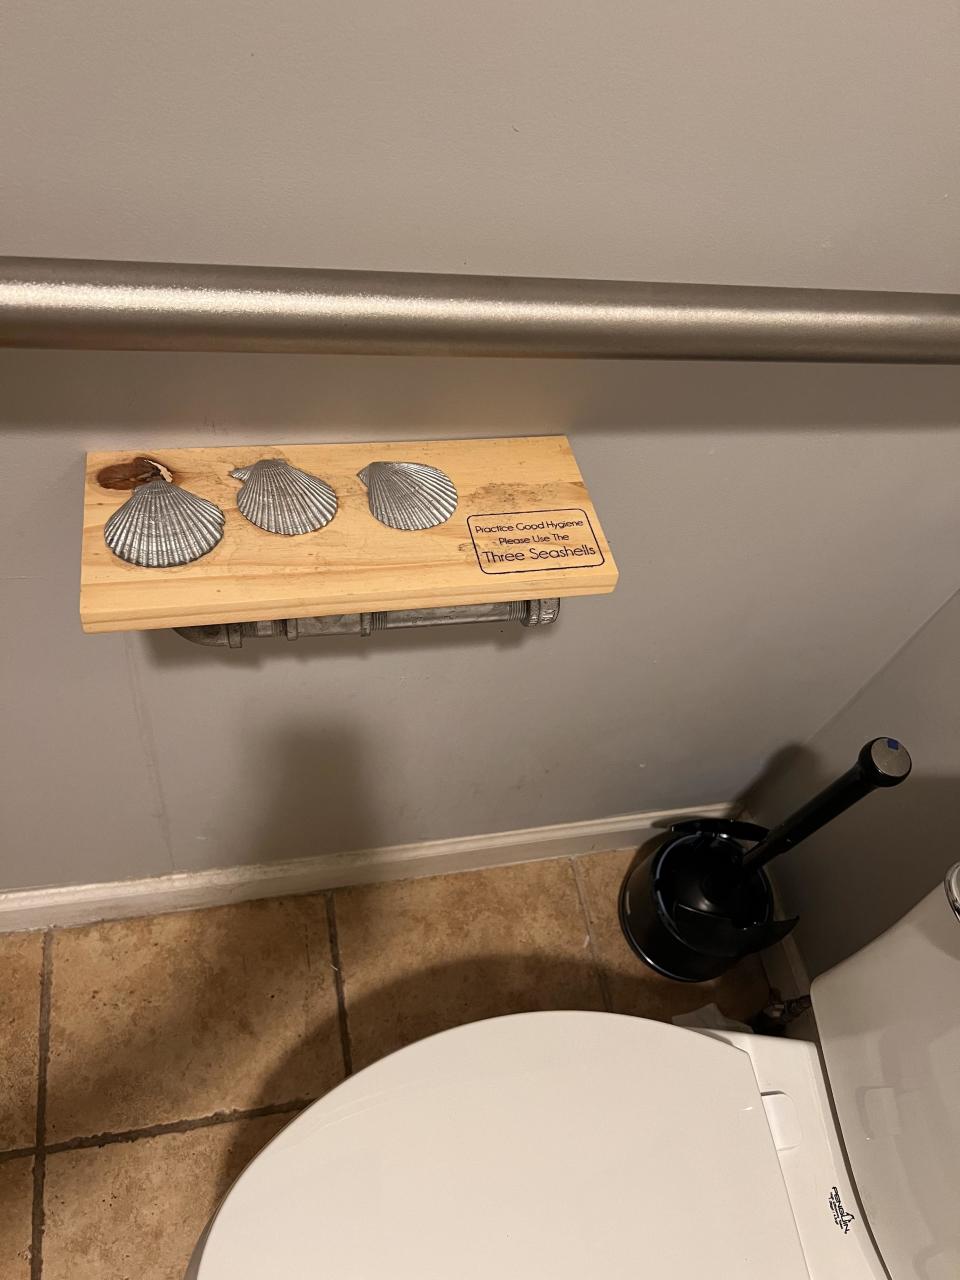 Wooden shelf in bathroom with three seashells and text: "Please Consider Using These Seashells."